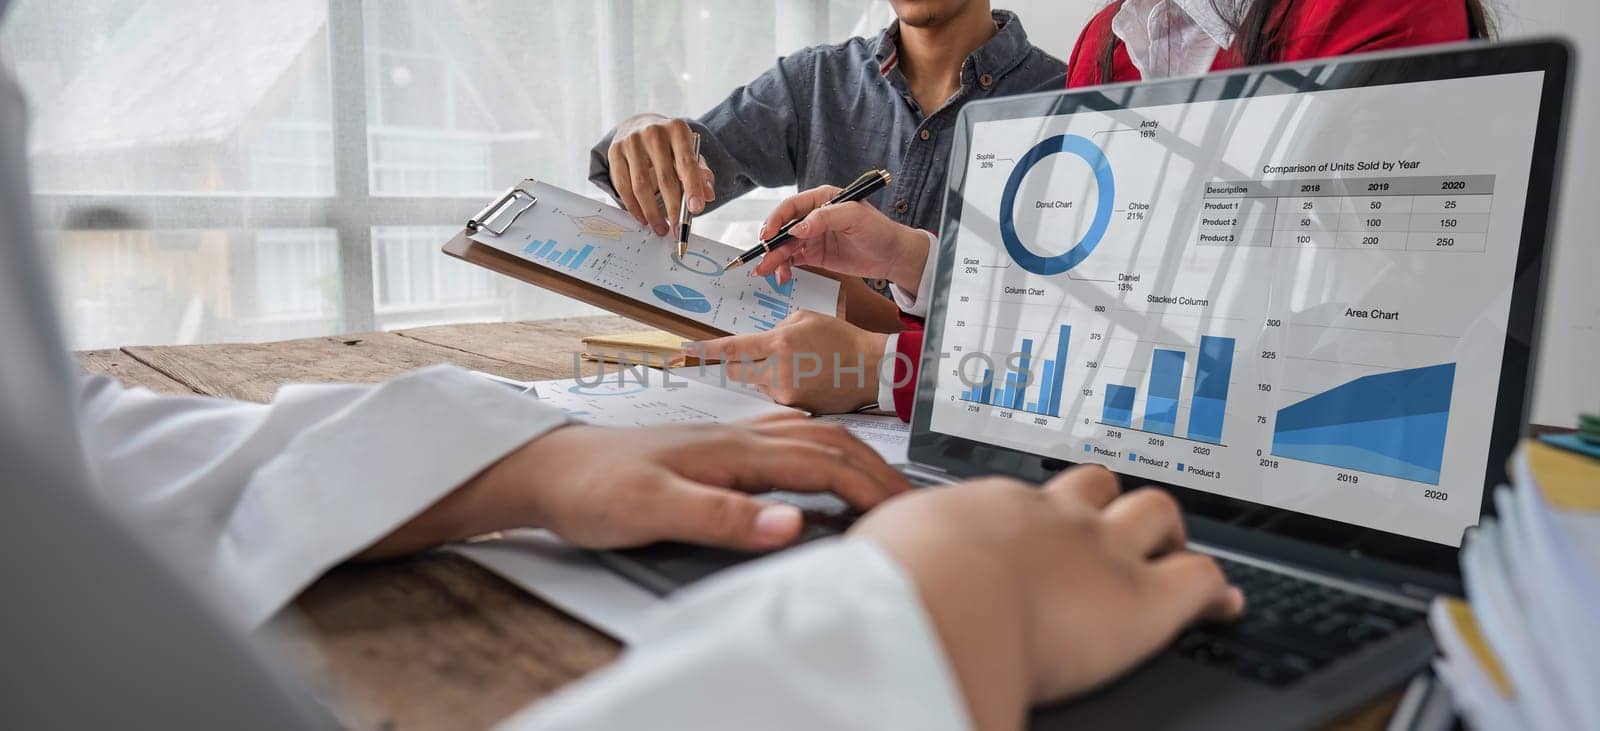 Business People Meeting using laptop computer,calculator,notebook,stock market chart paper for analysis Plans to improve quality next month. Conference Discussion Corporate Concept